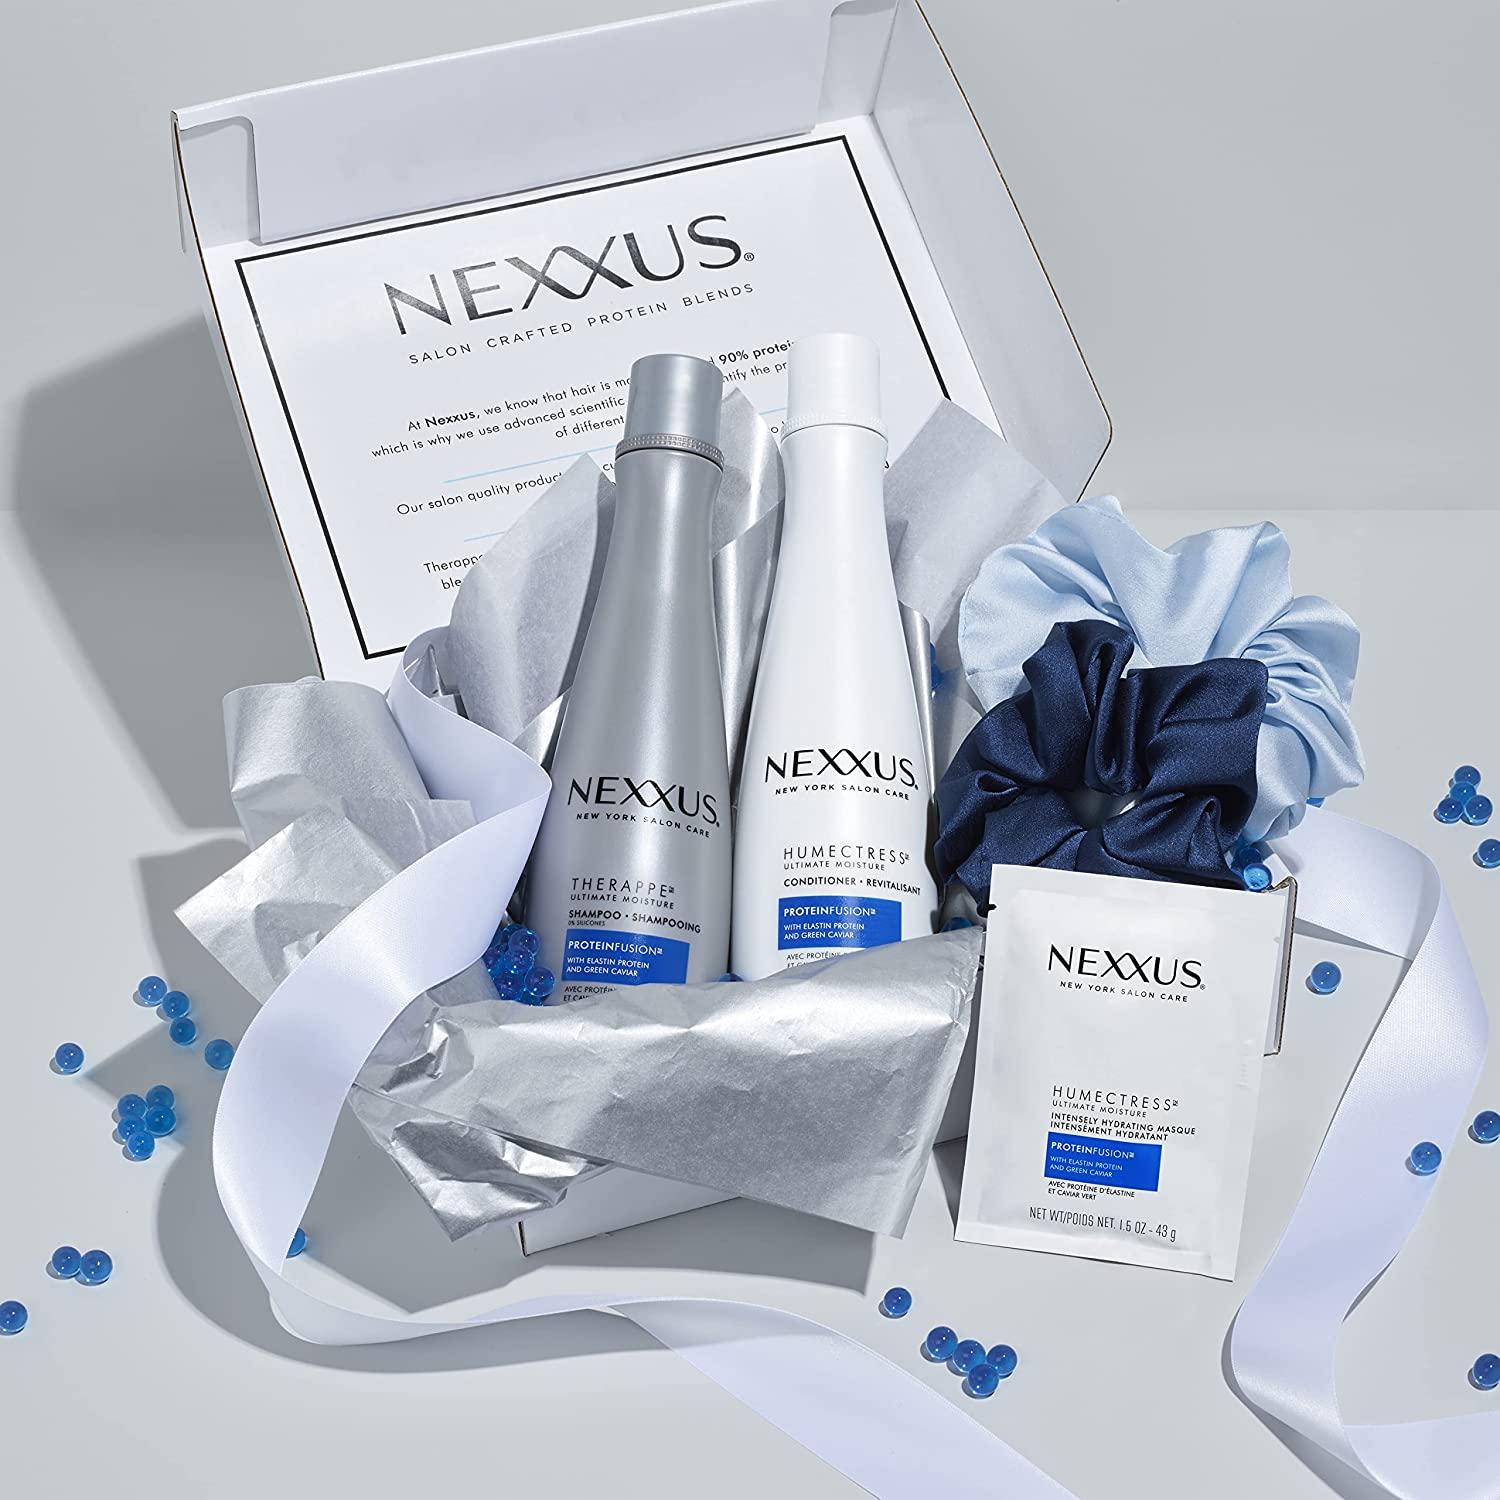 Nexxus Shampoo, Conditioner, Hair Regimen Gift Set for Dry Hair Therappe Humectress Beauty Gift Sets